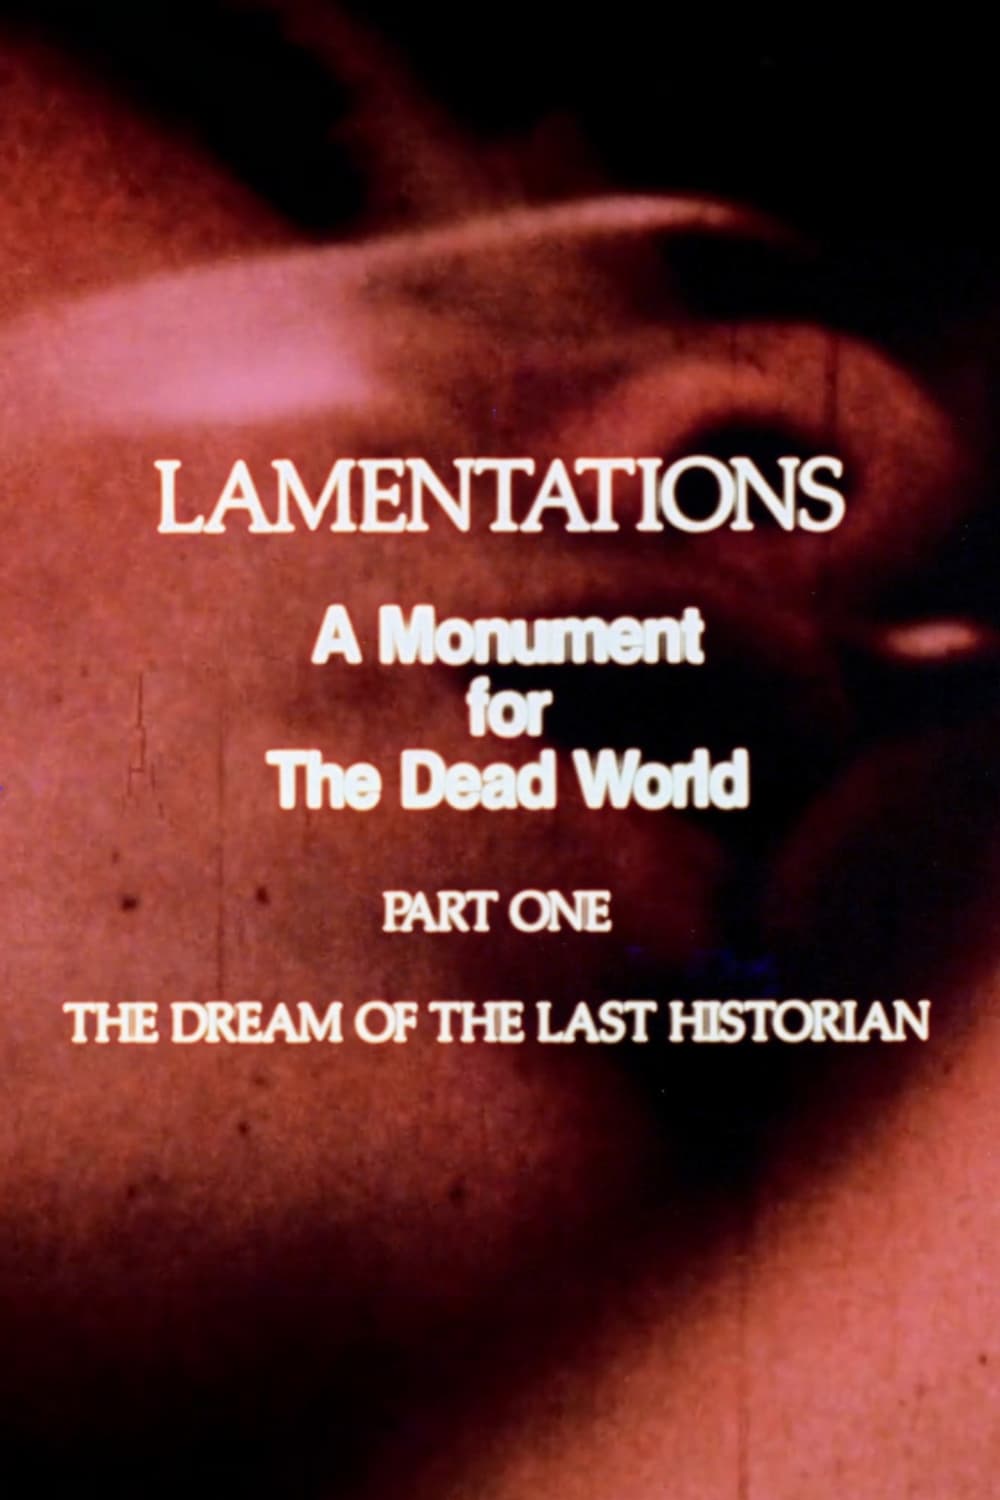 Lamentations: A Monument to the Dead World, Part 1: The Dream of the Last Historian